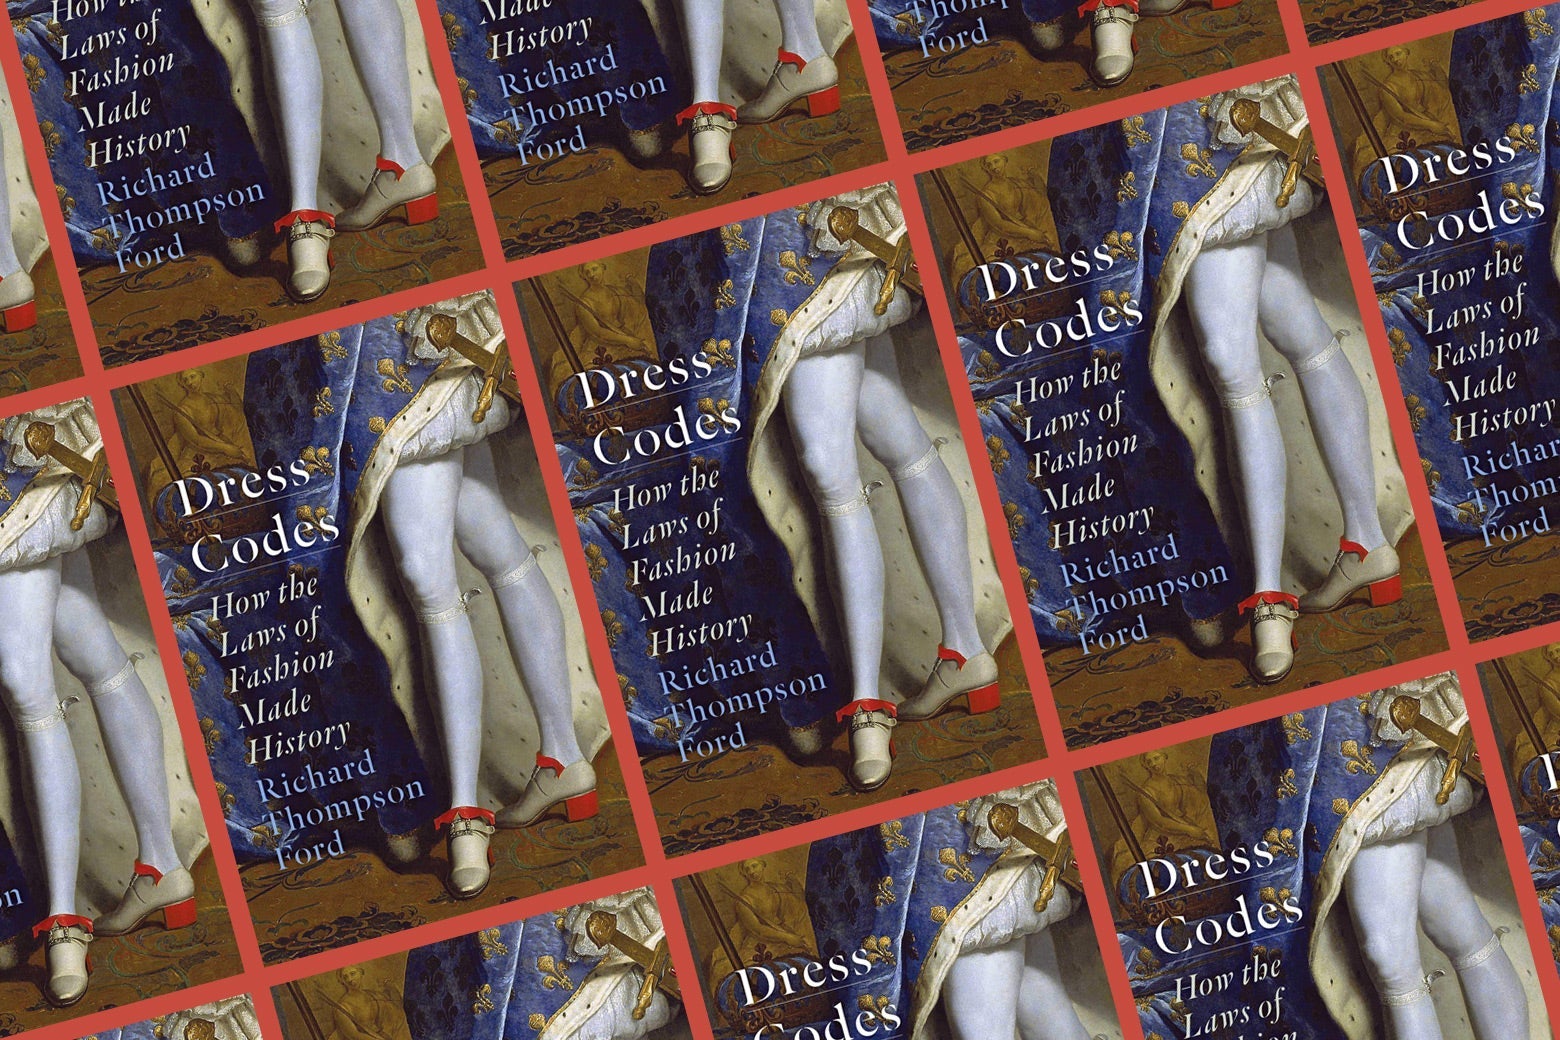 Dress Codes book cover, tiled.